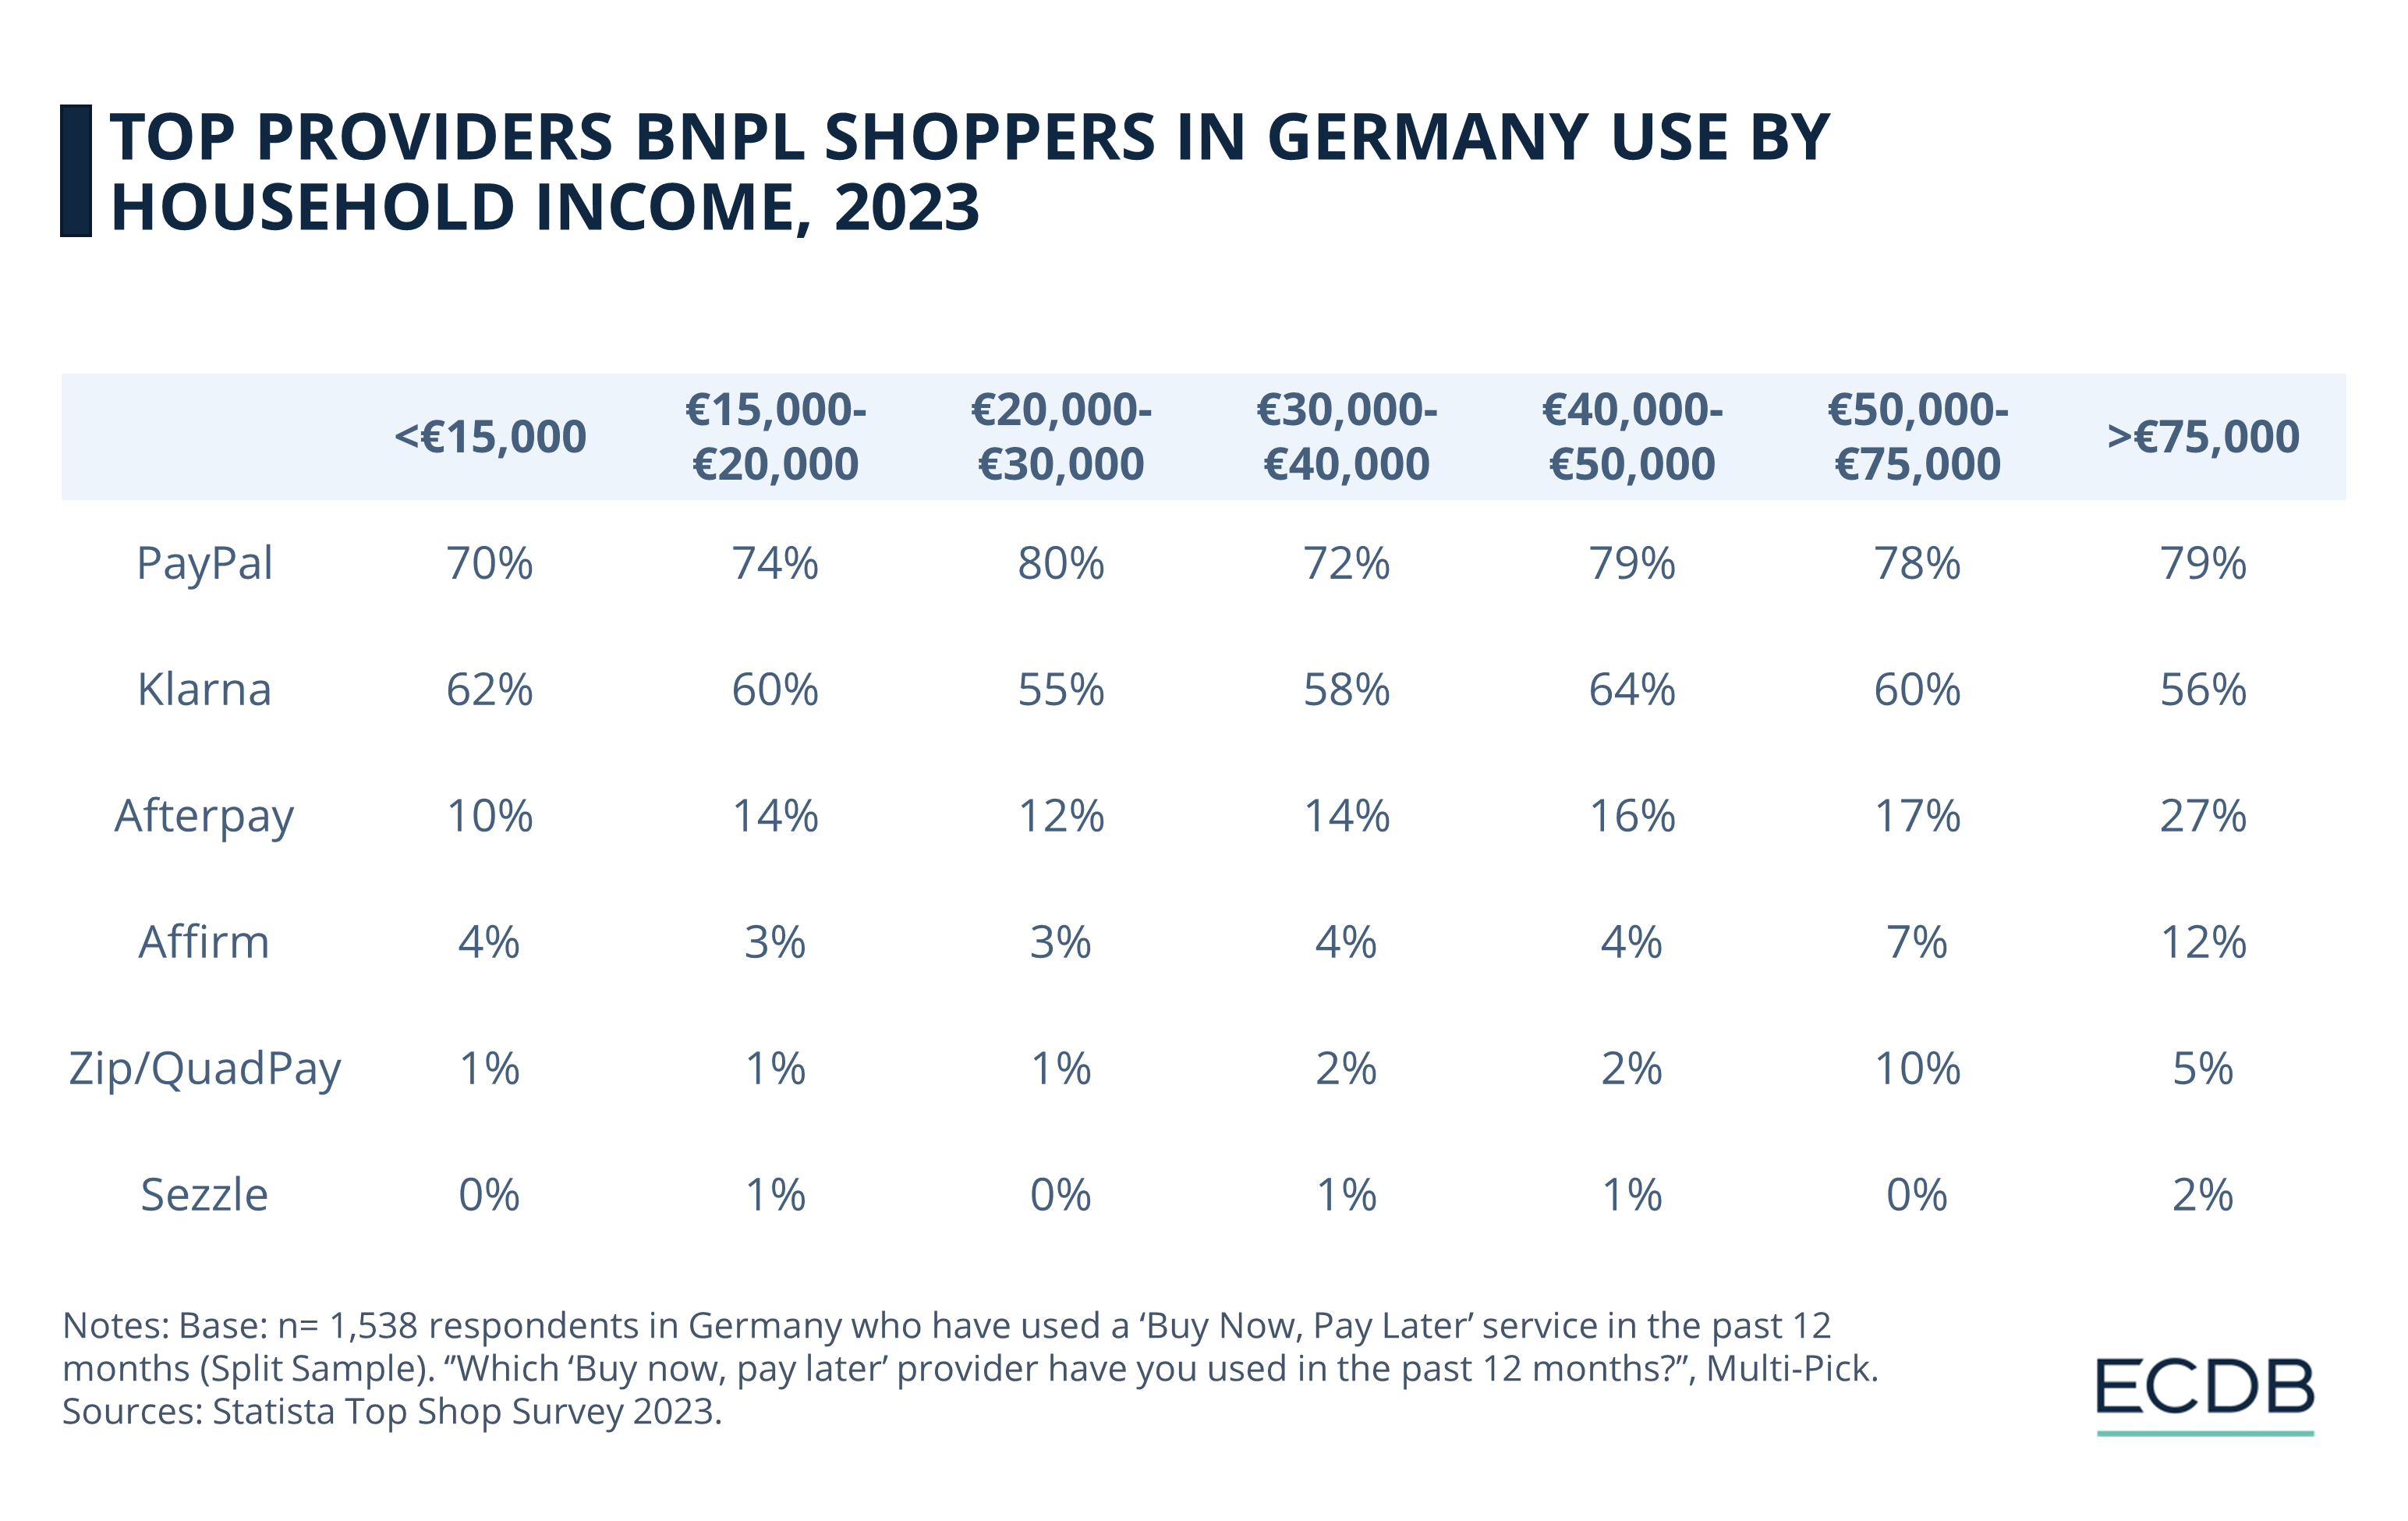 Top Providers BNPL Shoppers in Germany Use by Household Income, 2023